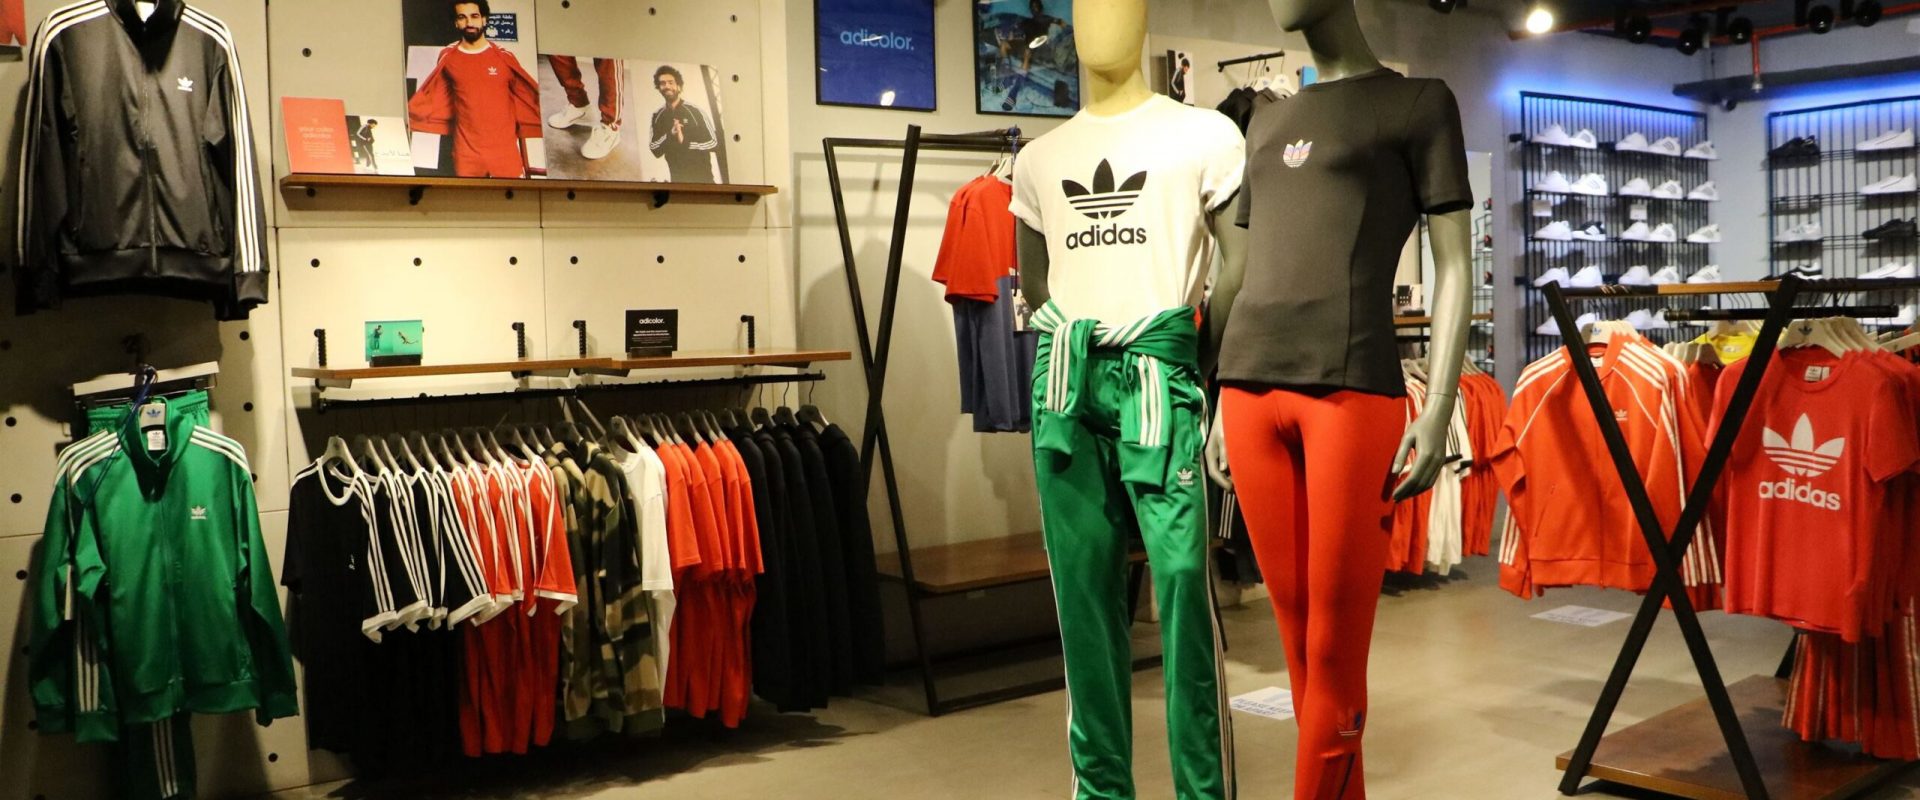 adidas Outlet, Sports Apparel, Outlet